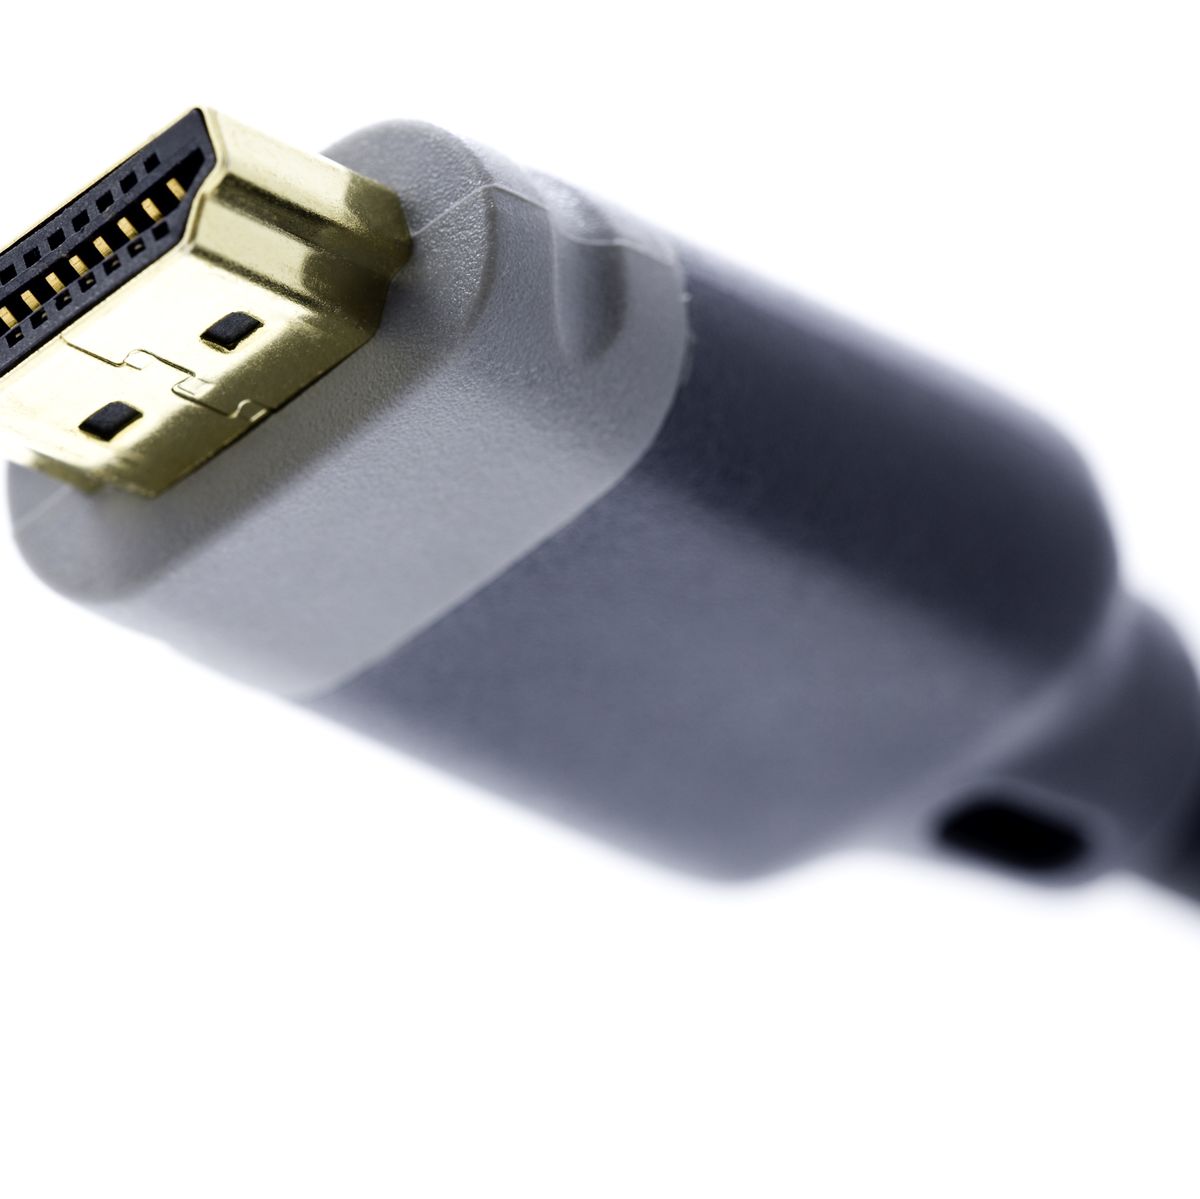 How to extend your HDMI signal (Via Ethernet) – Big Screen Pro